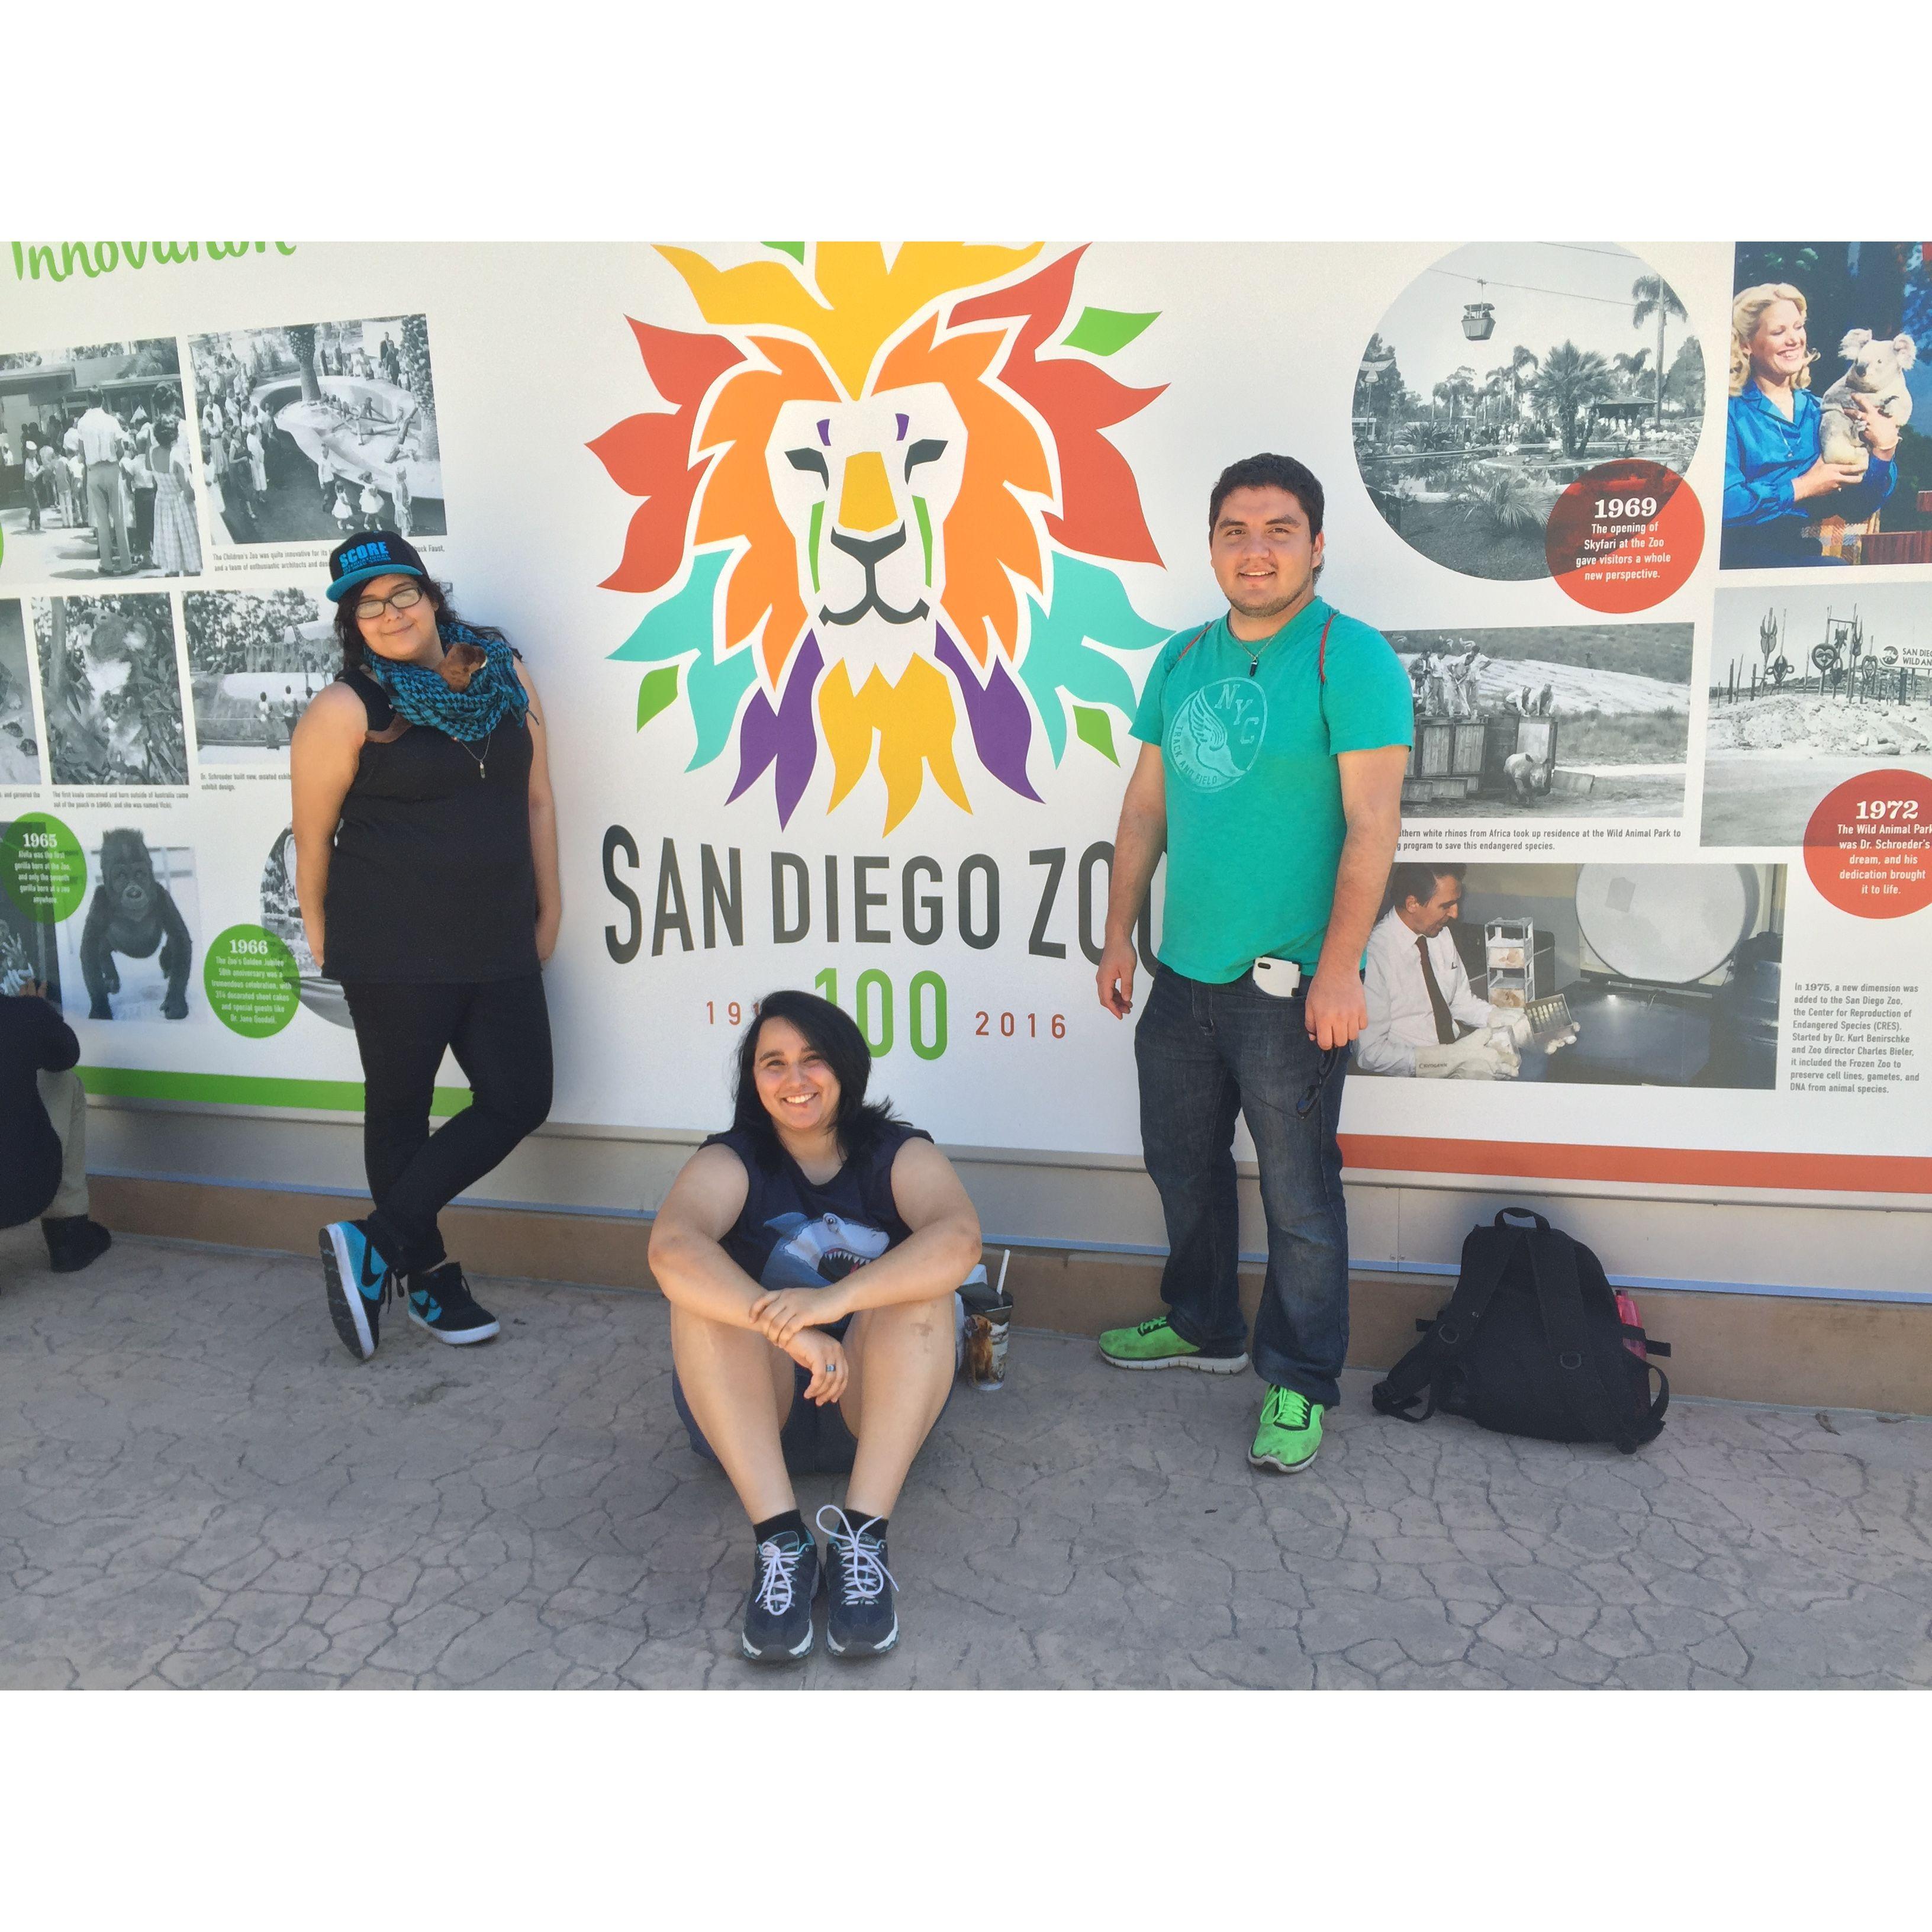 March 2016 - Surprise visits to San Diego Zoo